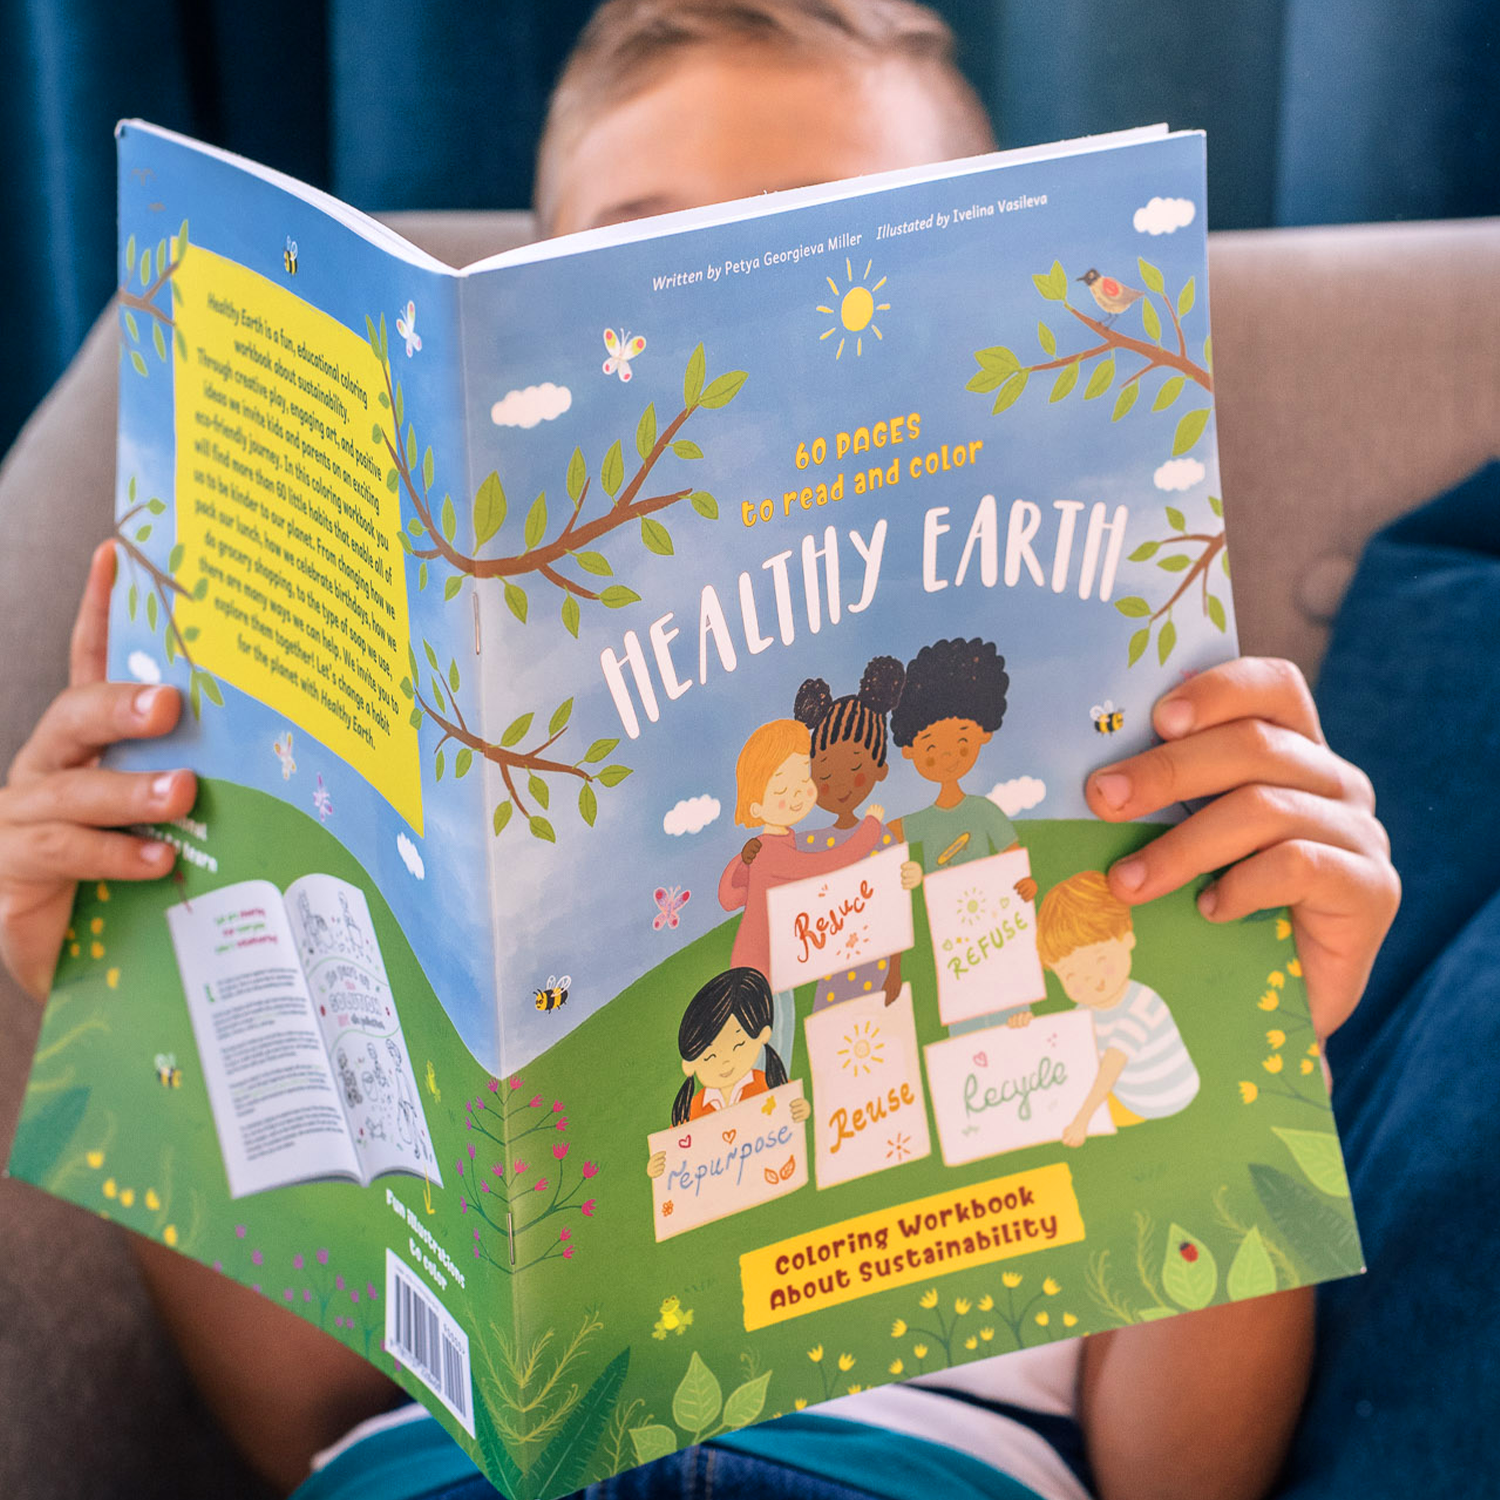 Healthy Earth is empowering kids with practical knowledge about sustainability